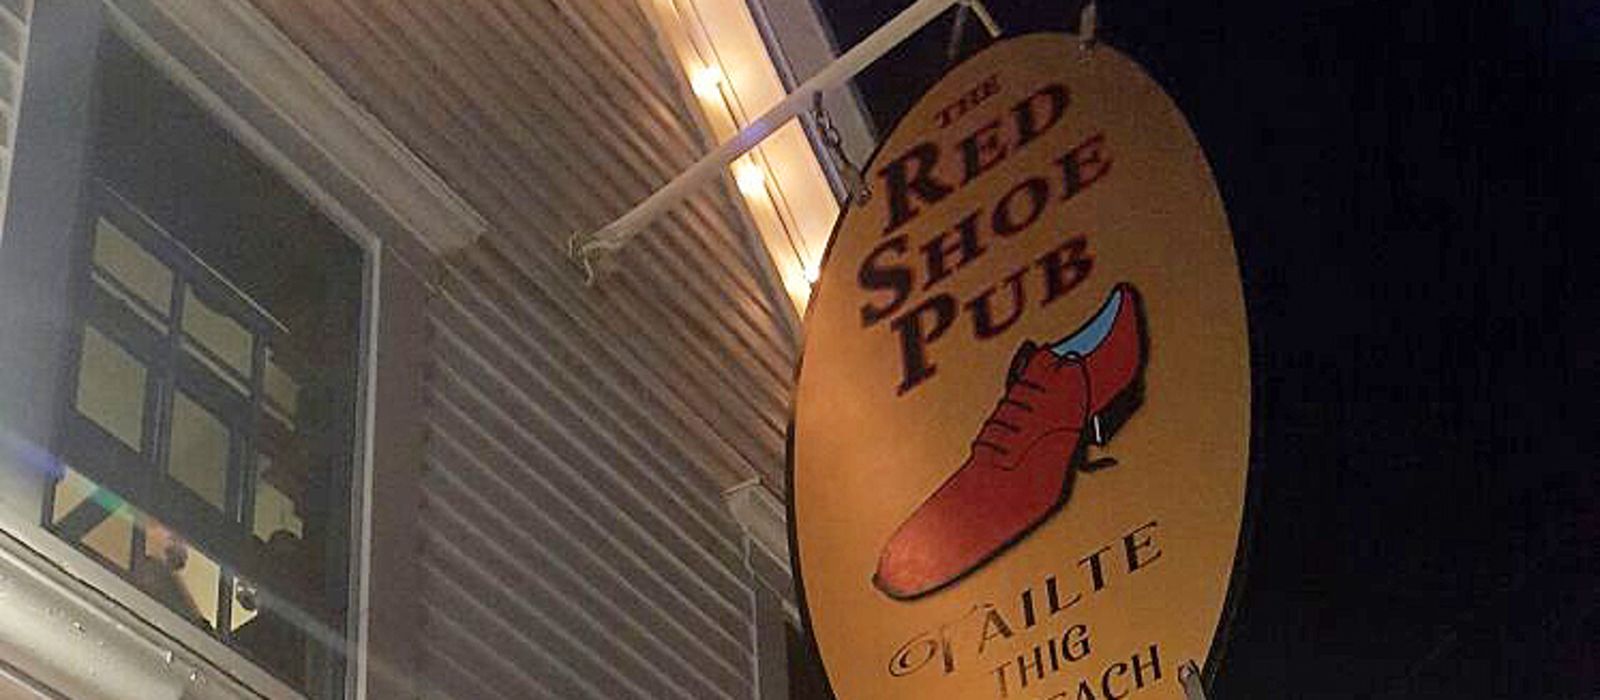 Red Shoe Pub in Mabou